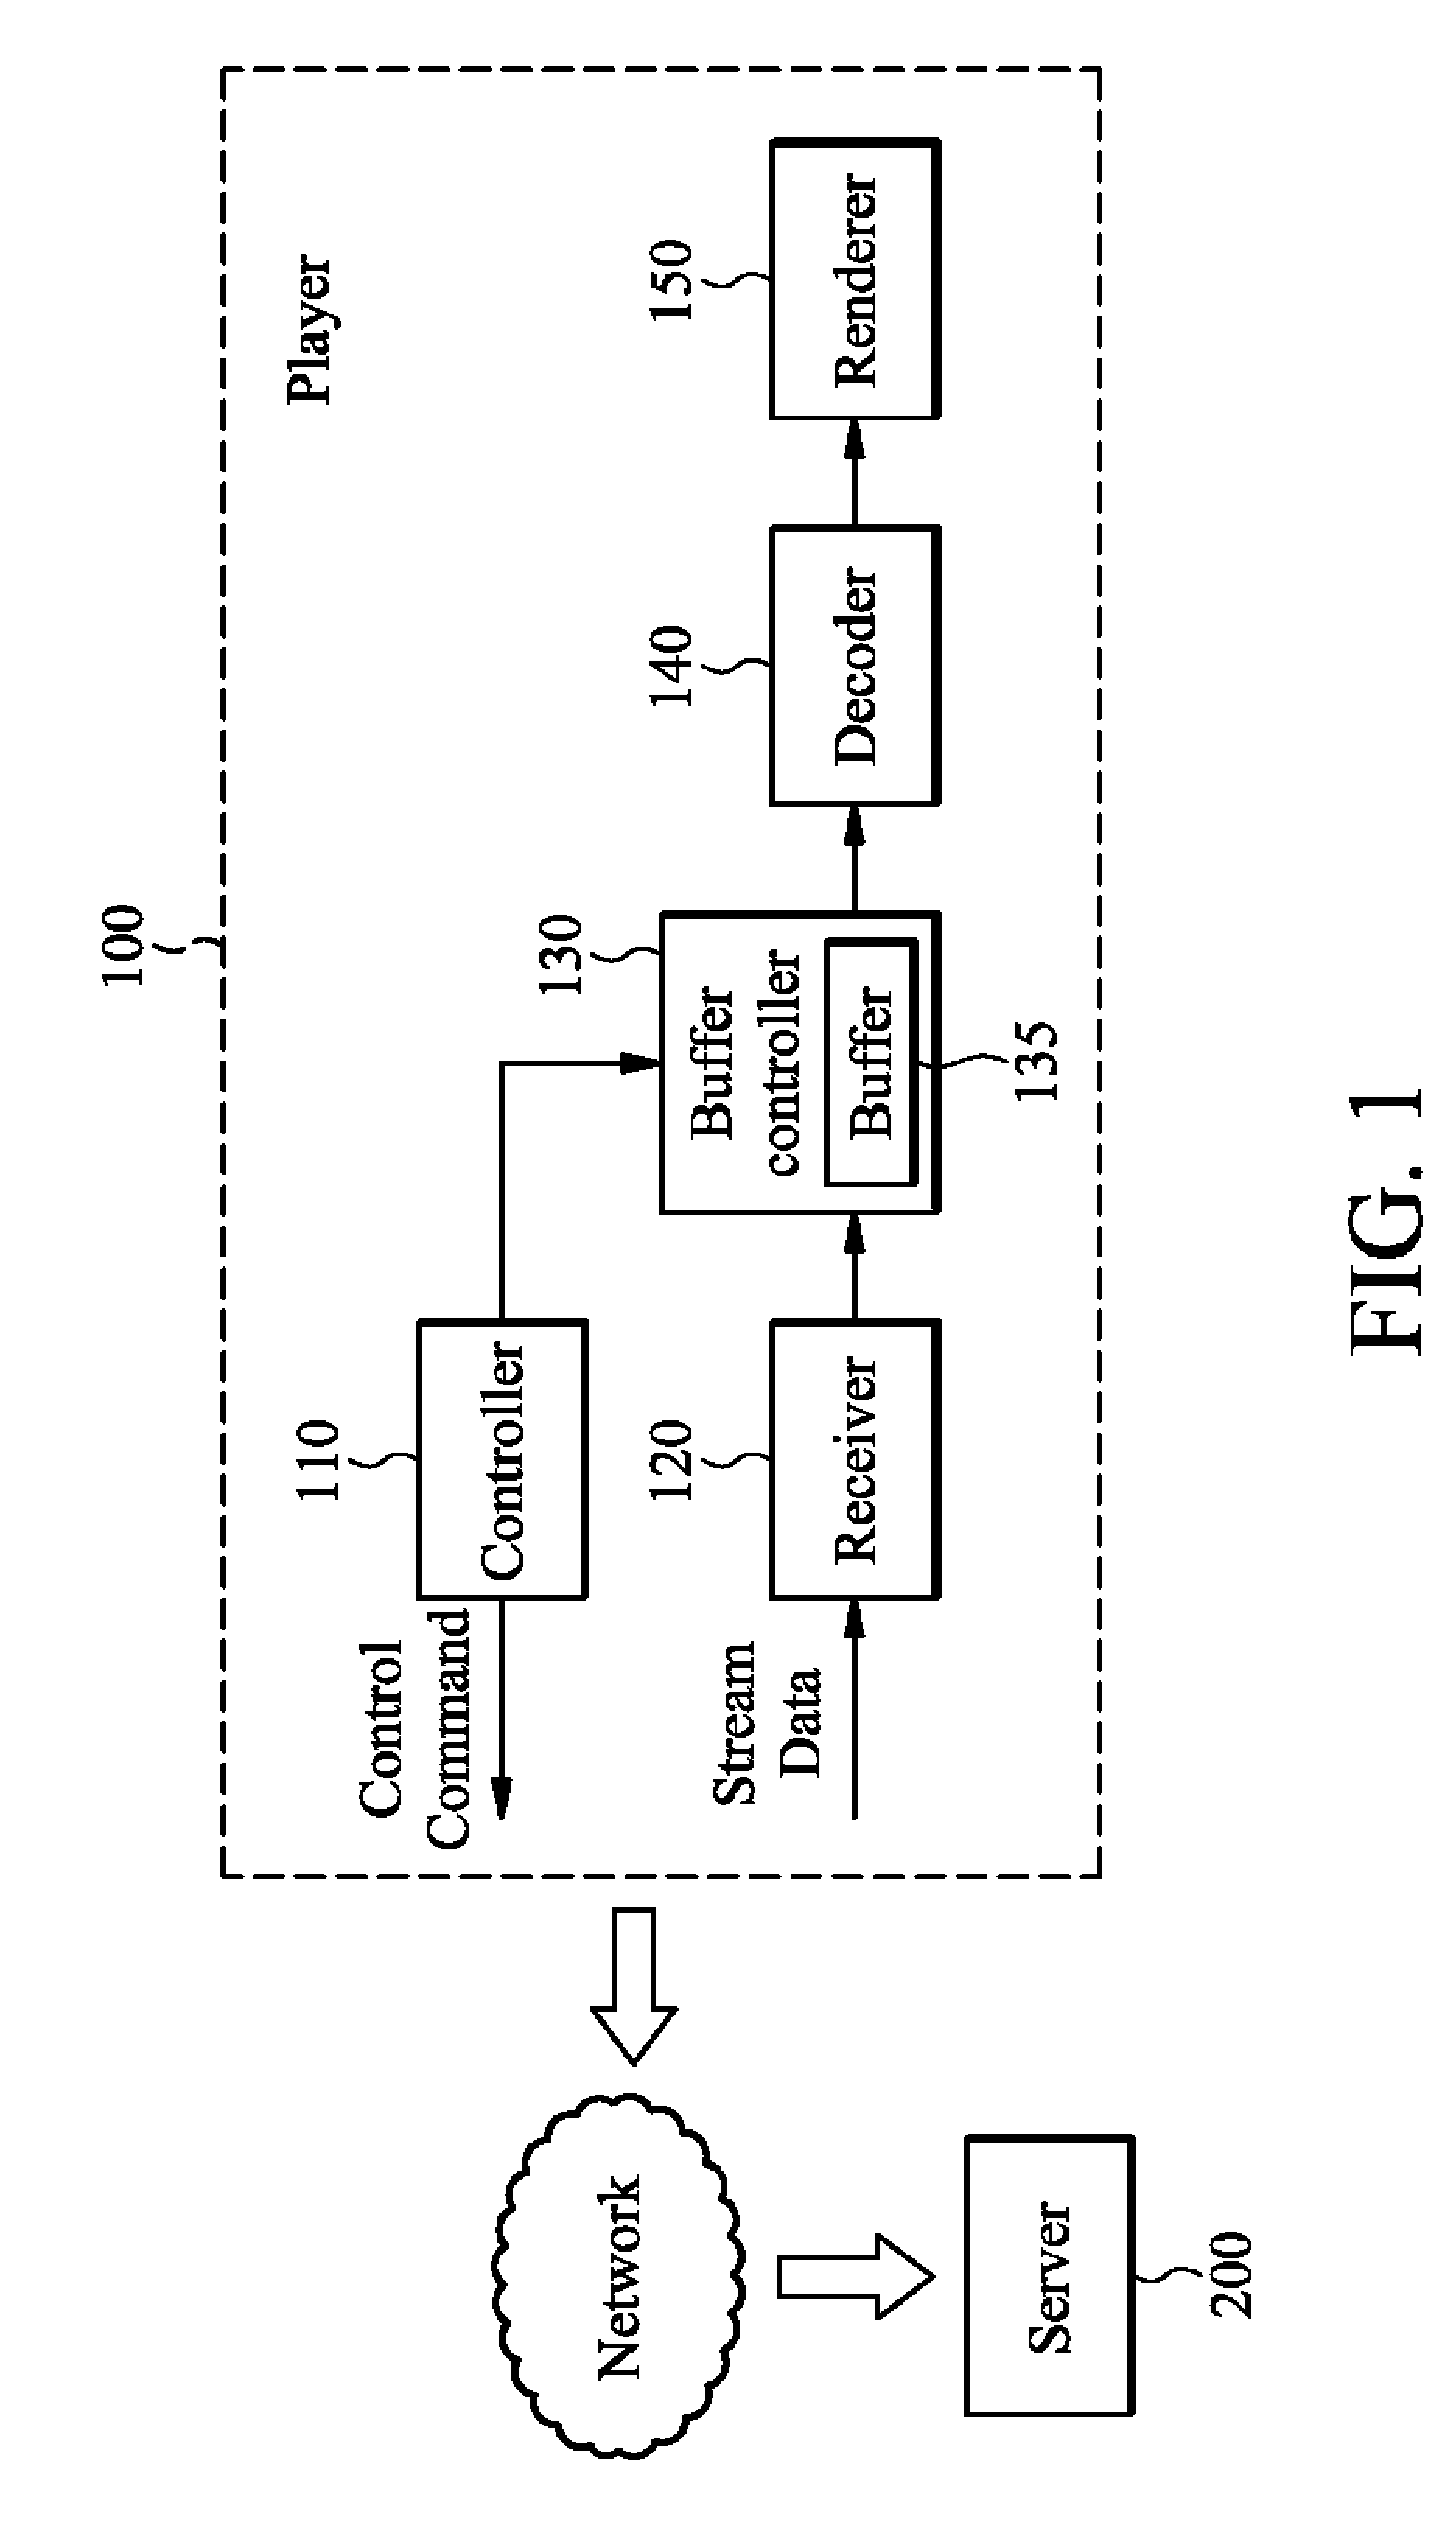 Method for audio and video control response and bandwidth adaptation based on network streaming applications and server using the same